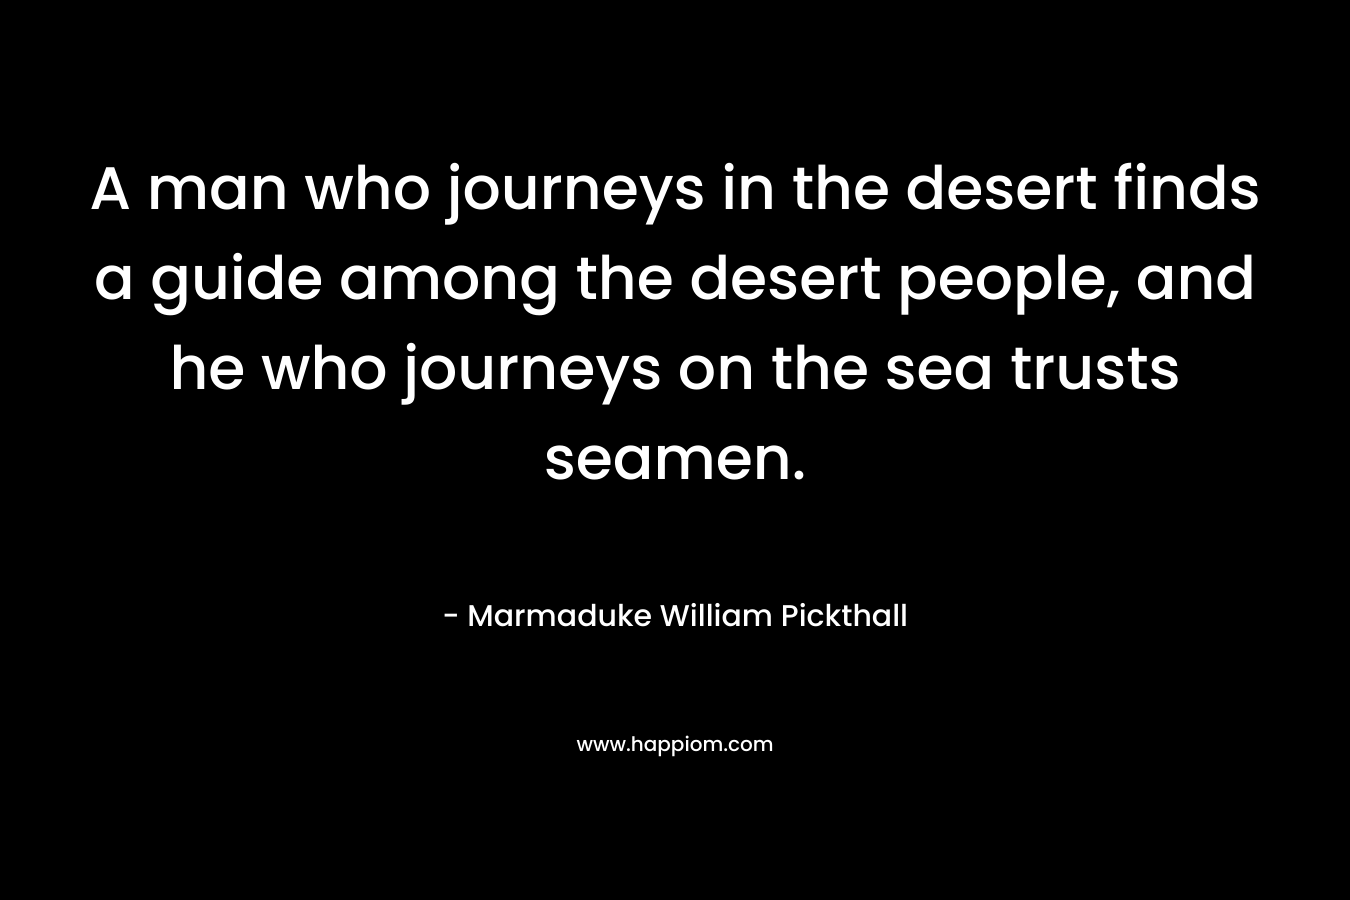 A man who journeys in the desert finds a guide among the desert people, and he who journeys on the sea trusts seamen.